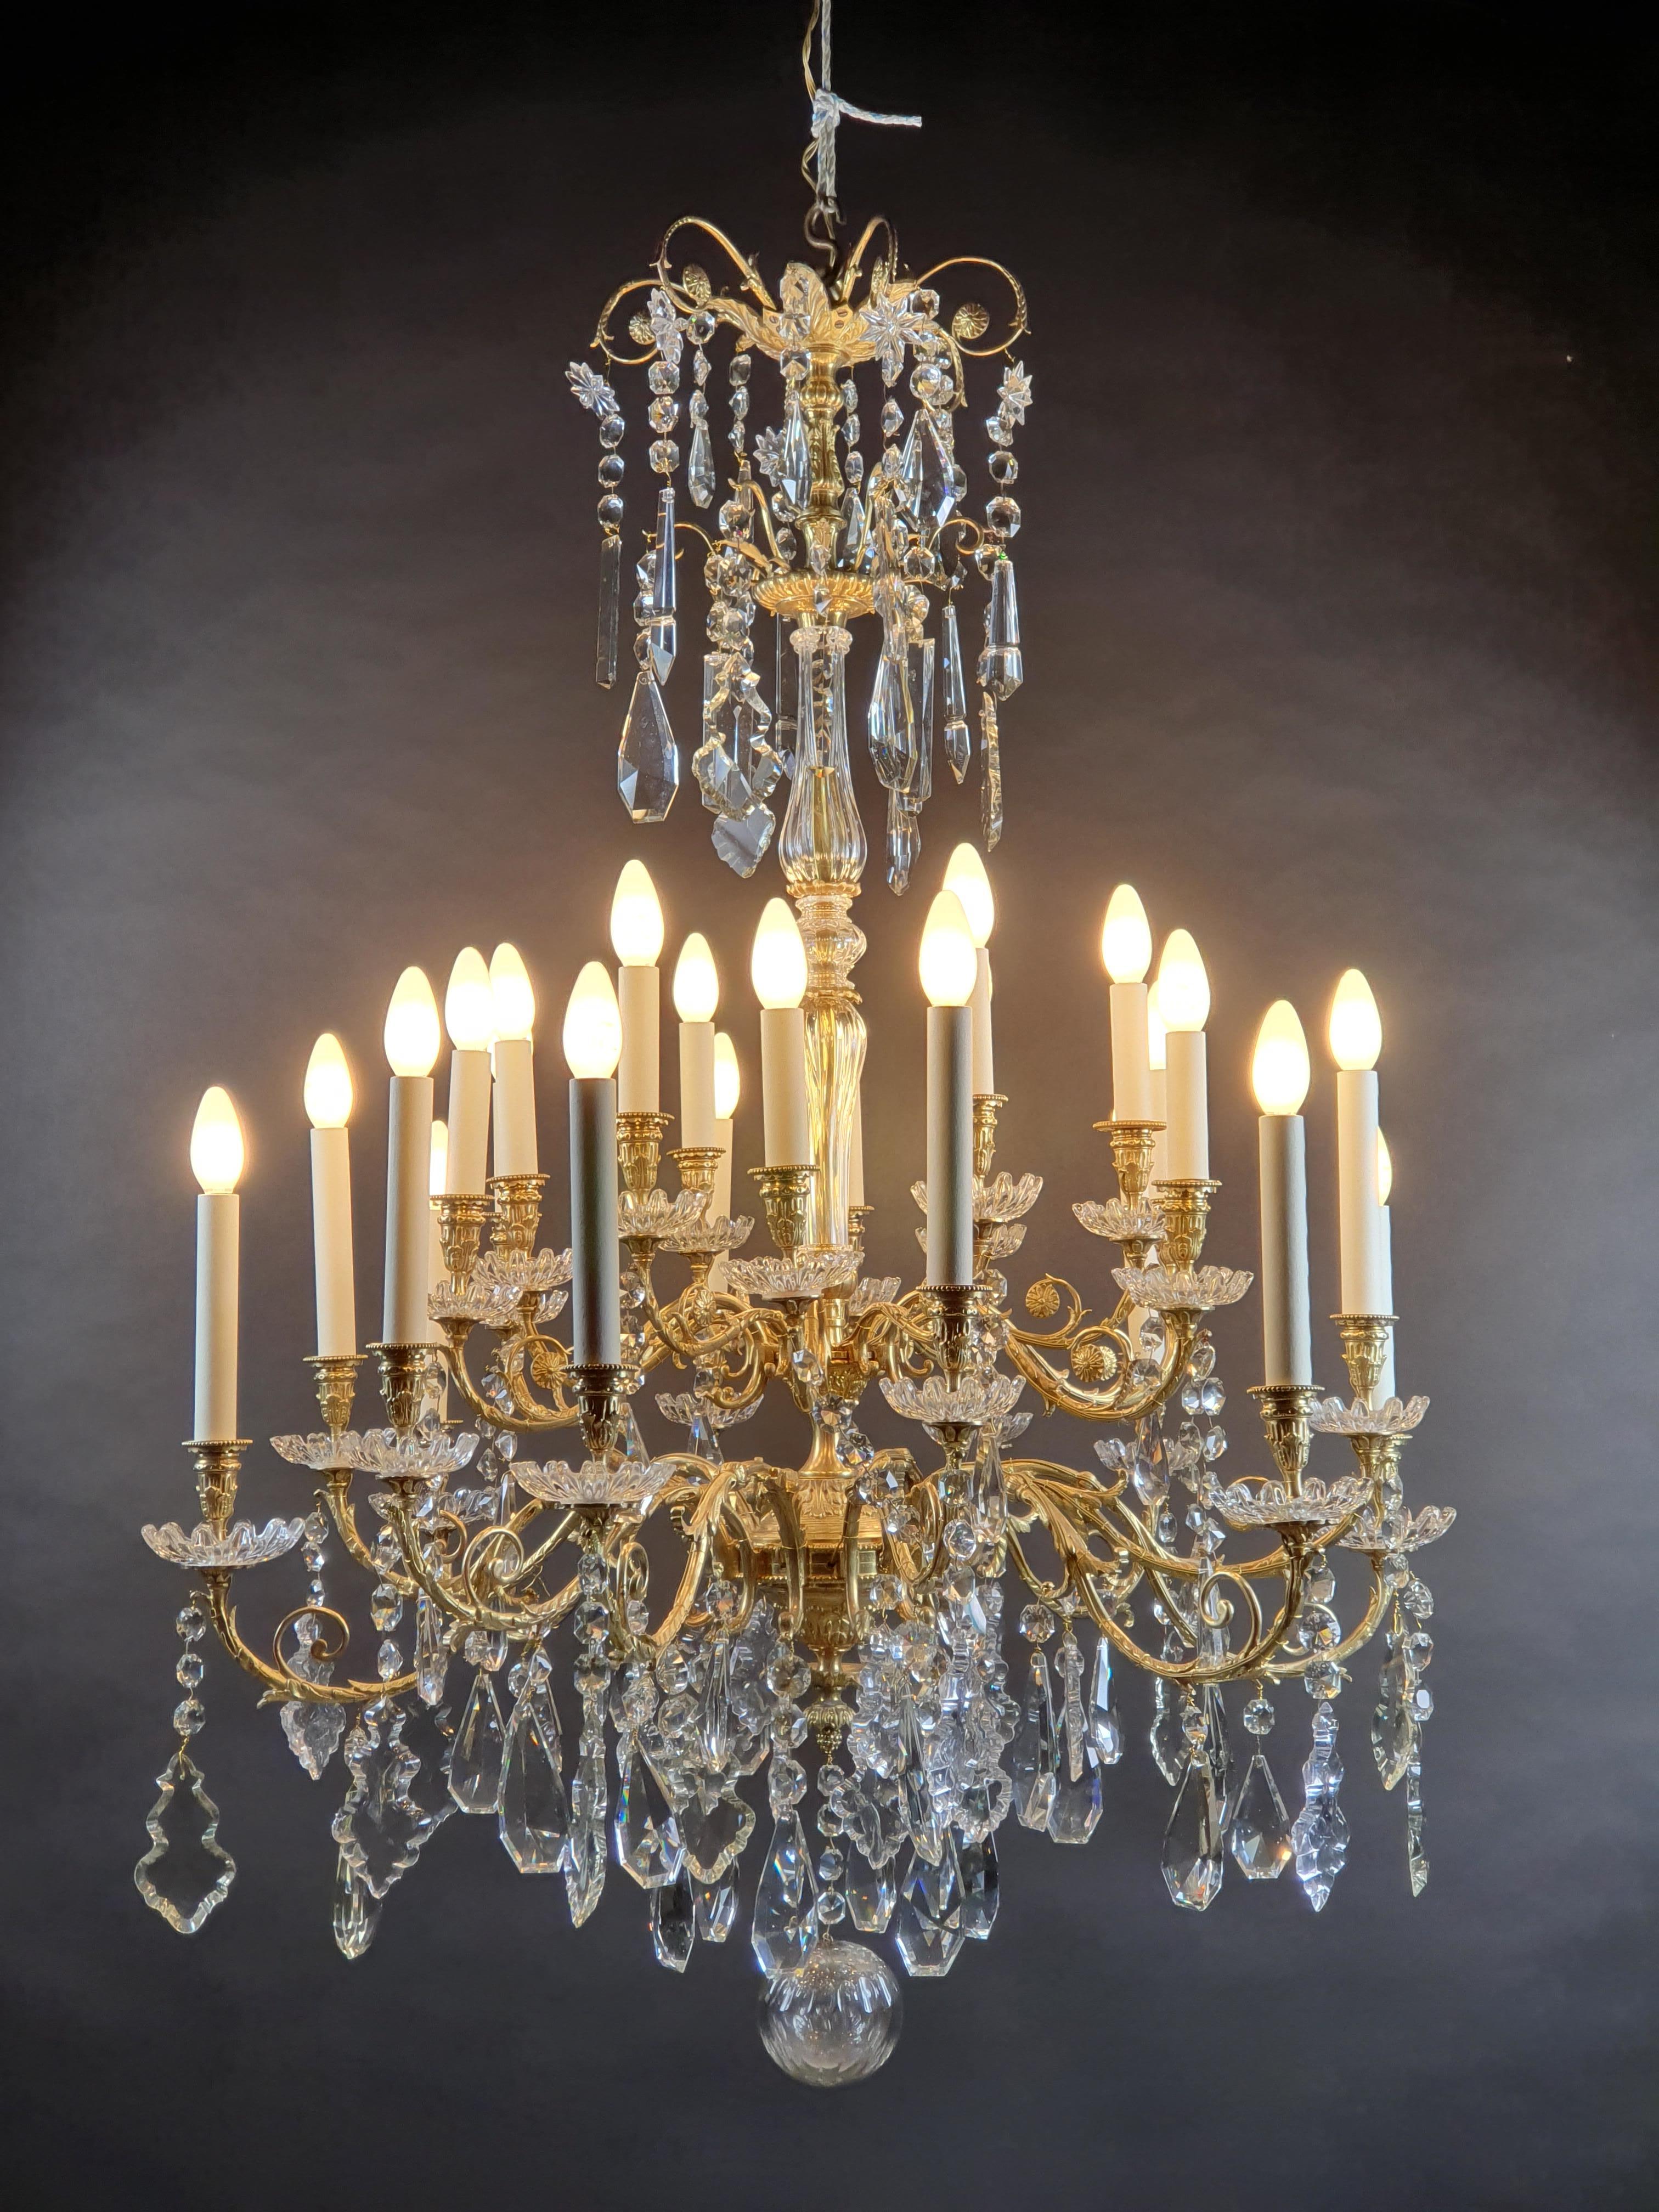 Large Napoleon III chandelier in gilded and ciseled bronze with 24 sconces in four rows, with a rich ornamentation of cut crystal pendants and toothed cups.

Quality work from the Napoleon III period around 1850.

Very good condition,